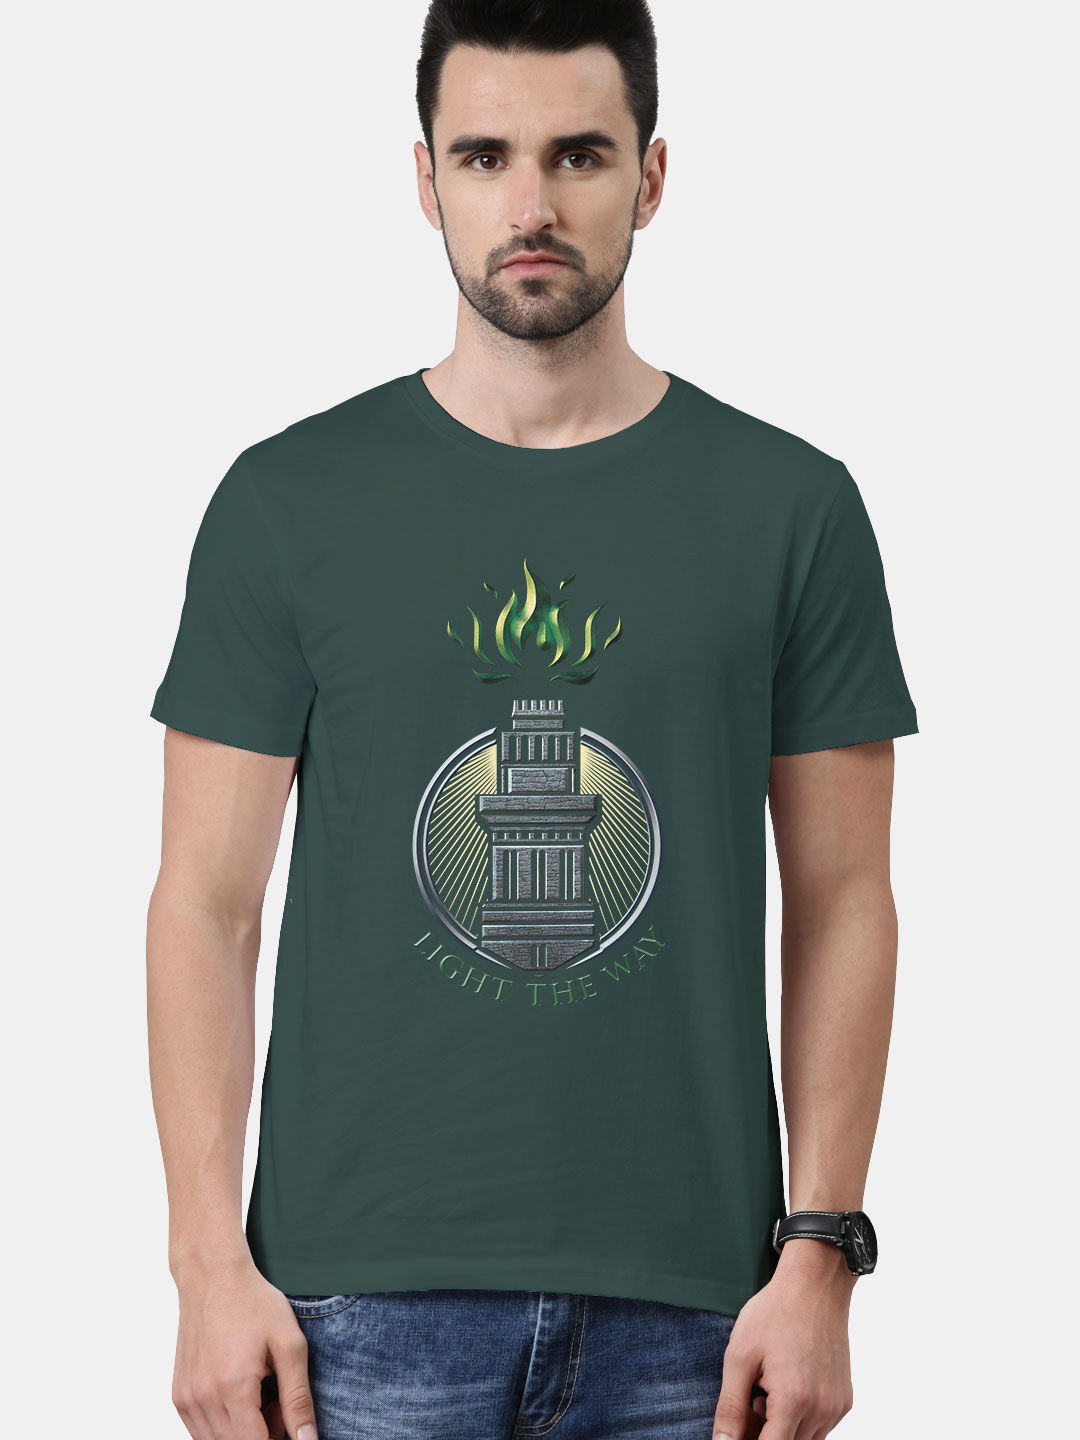 Buy Light the Way Front Bottle Green - Male Designer T-Shirts T-Shirts Online